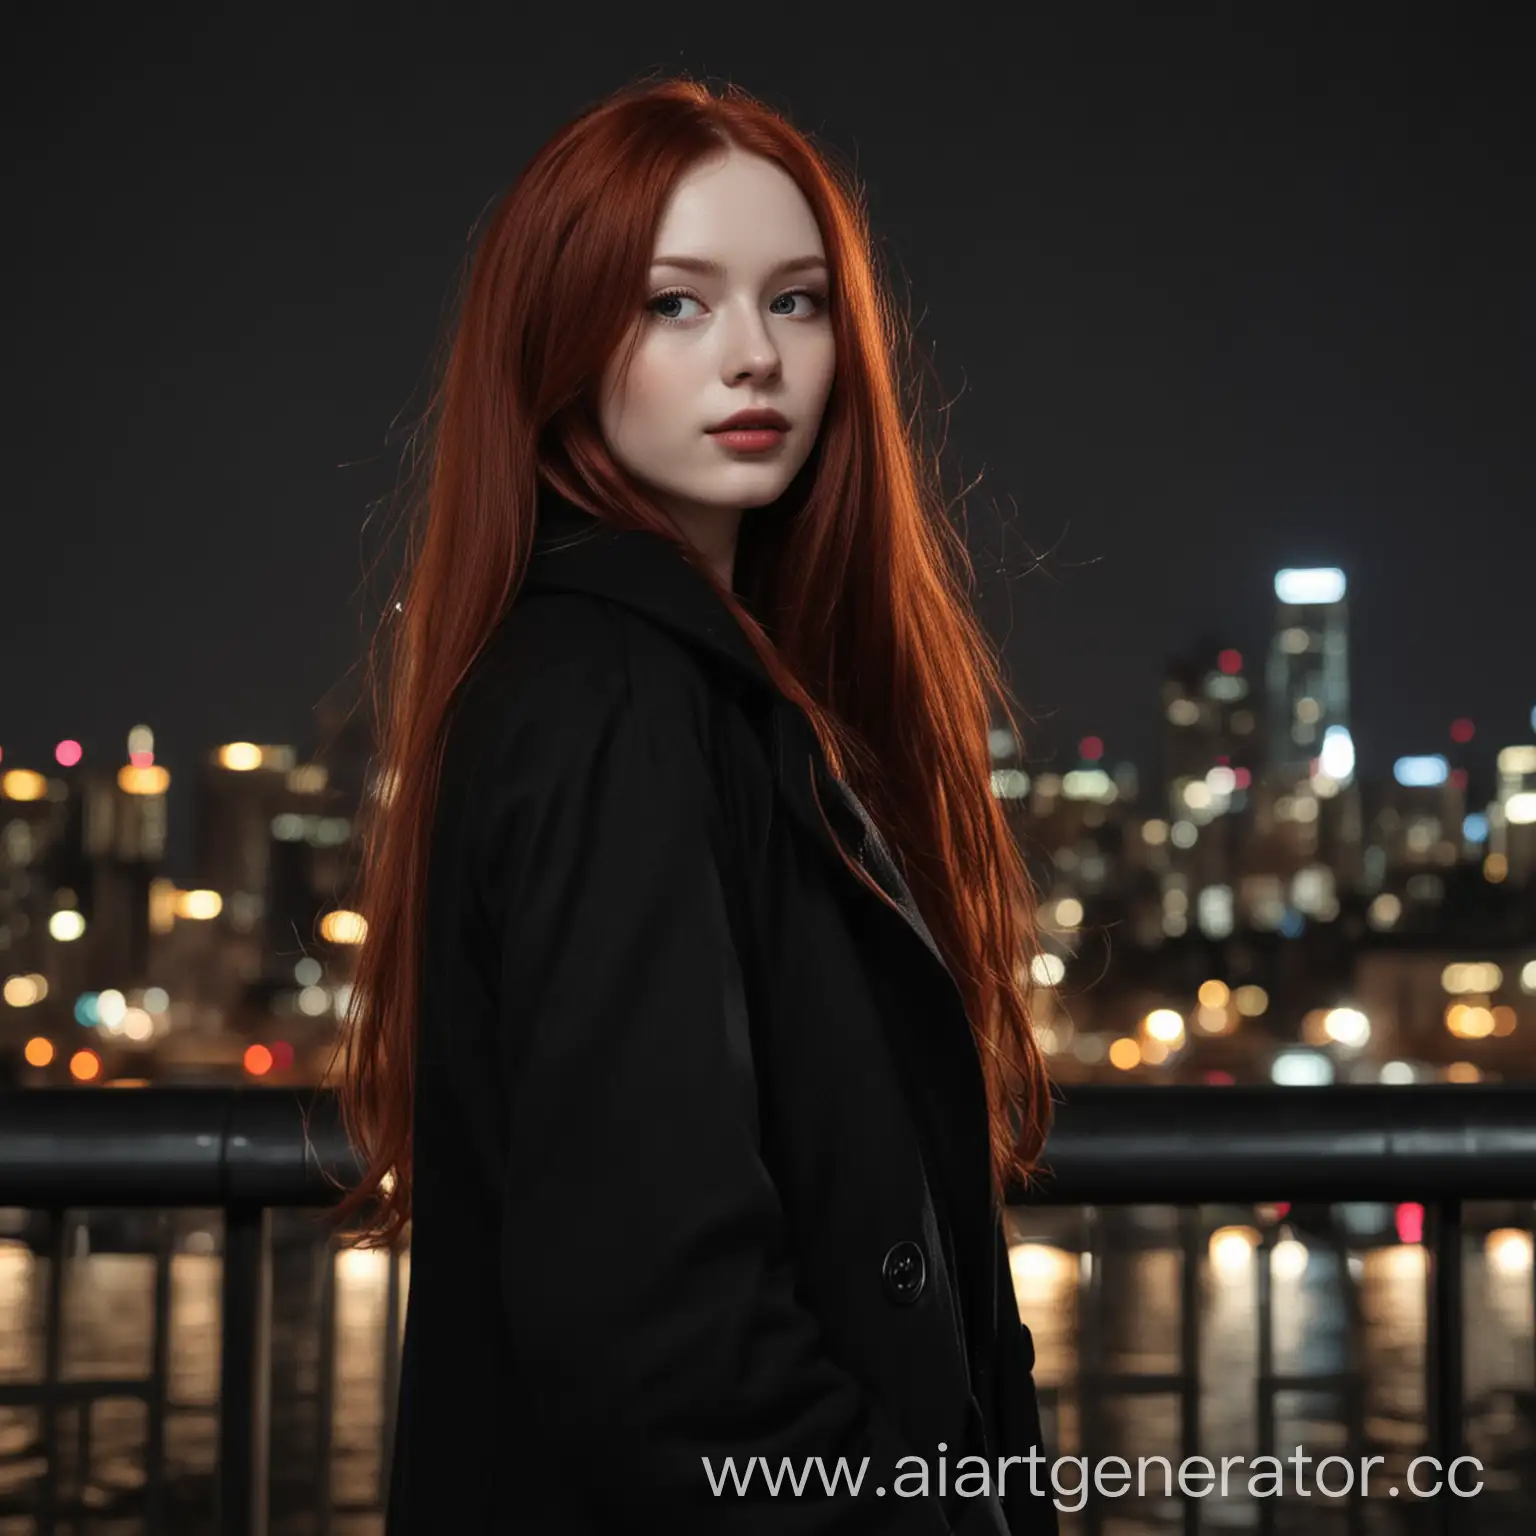 Mysterious-RedHaired-Girl-in-Black-Coat-Amidst-Urban-Nightfall